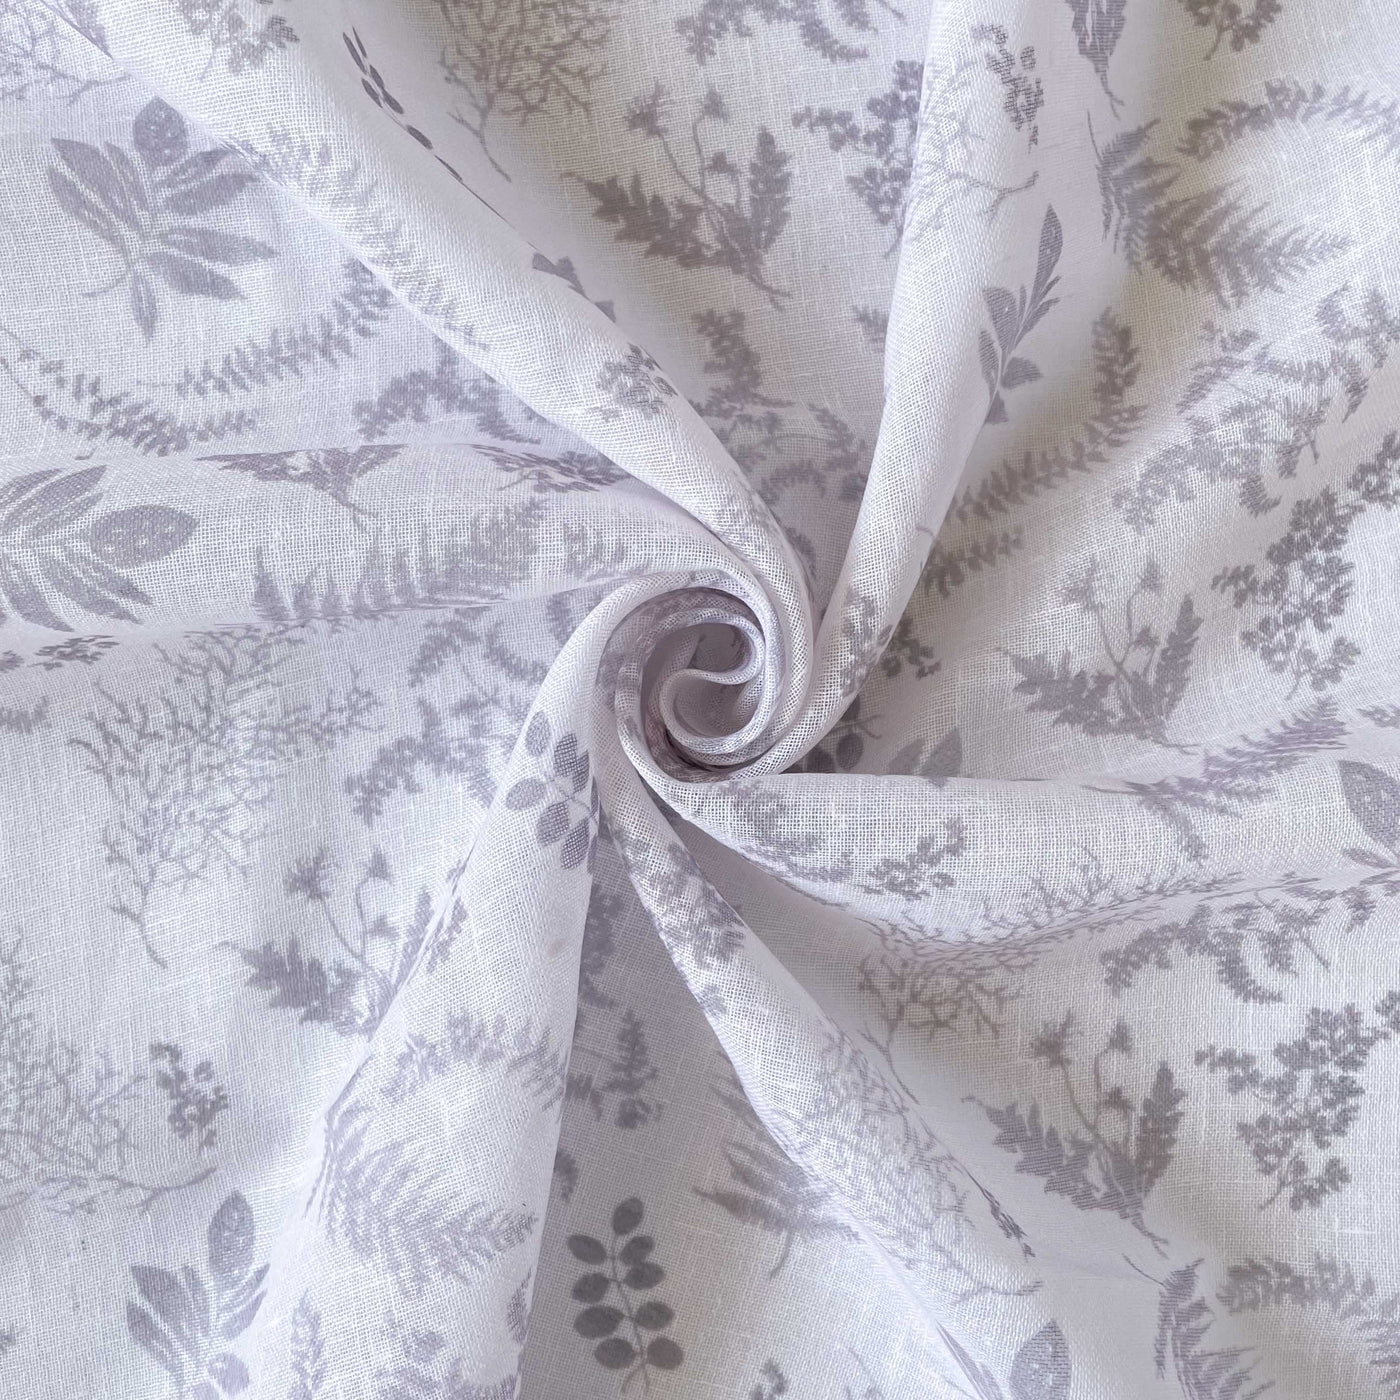 Digital Printed Linen Fabric Fabric Grey & White Abstract Leaves Printed Linen Fabric (Width 54 Inches)